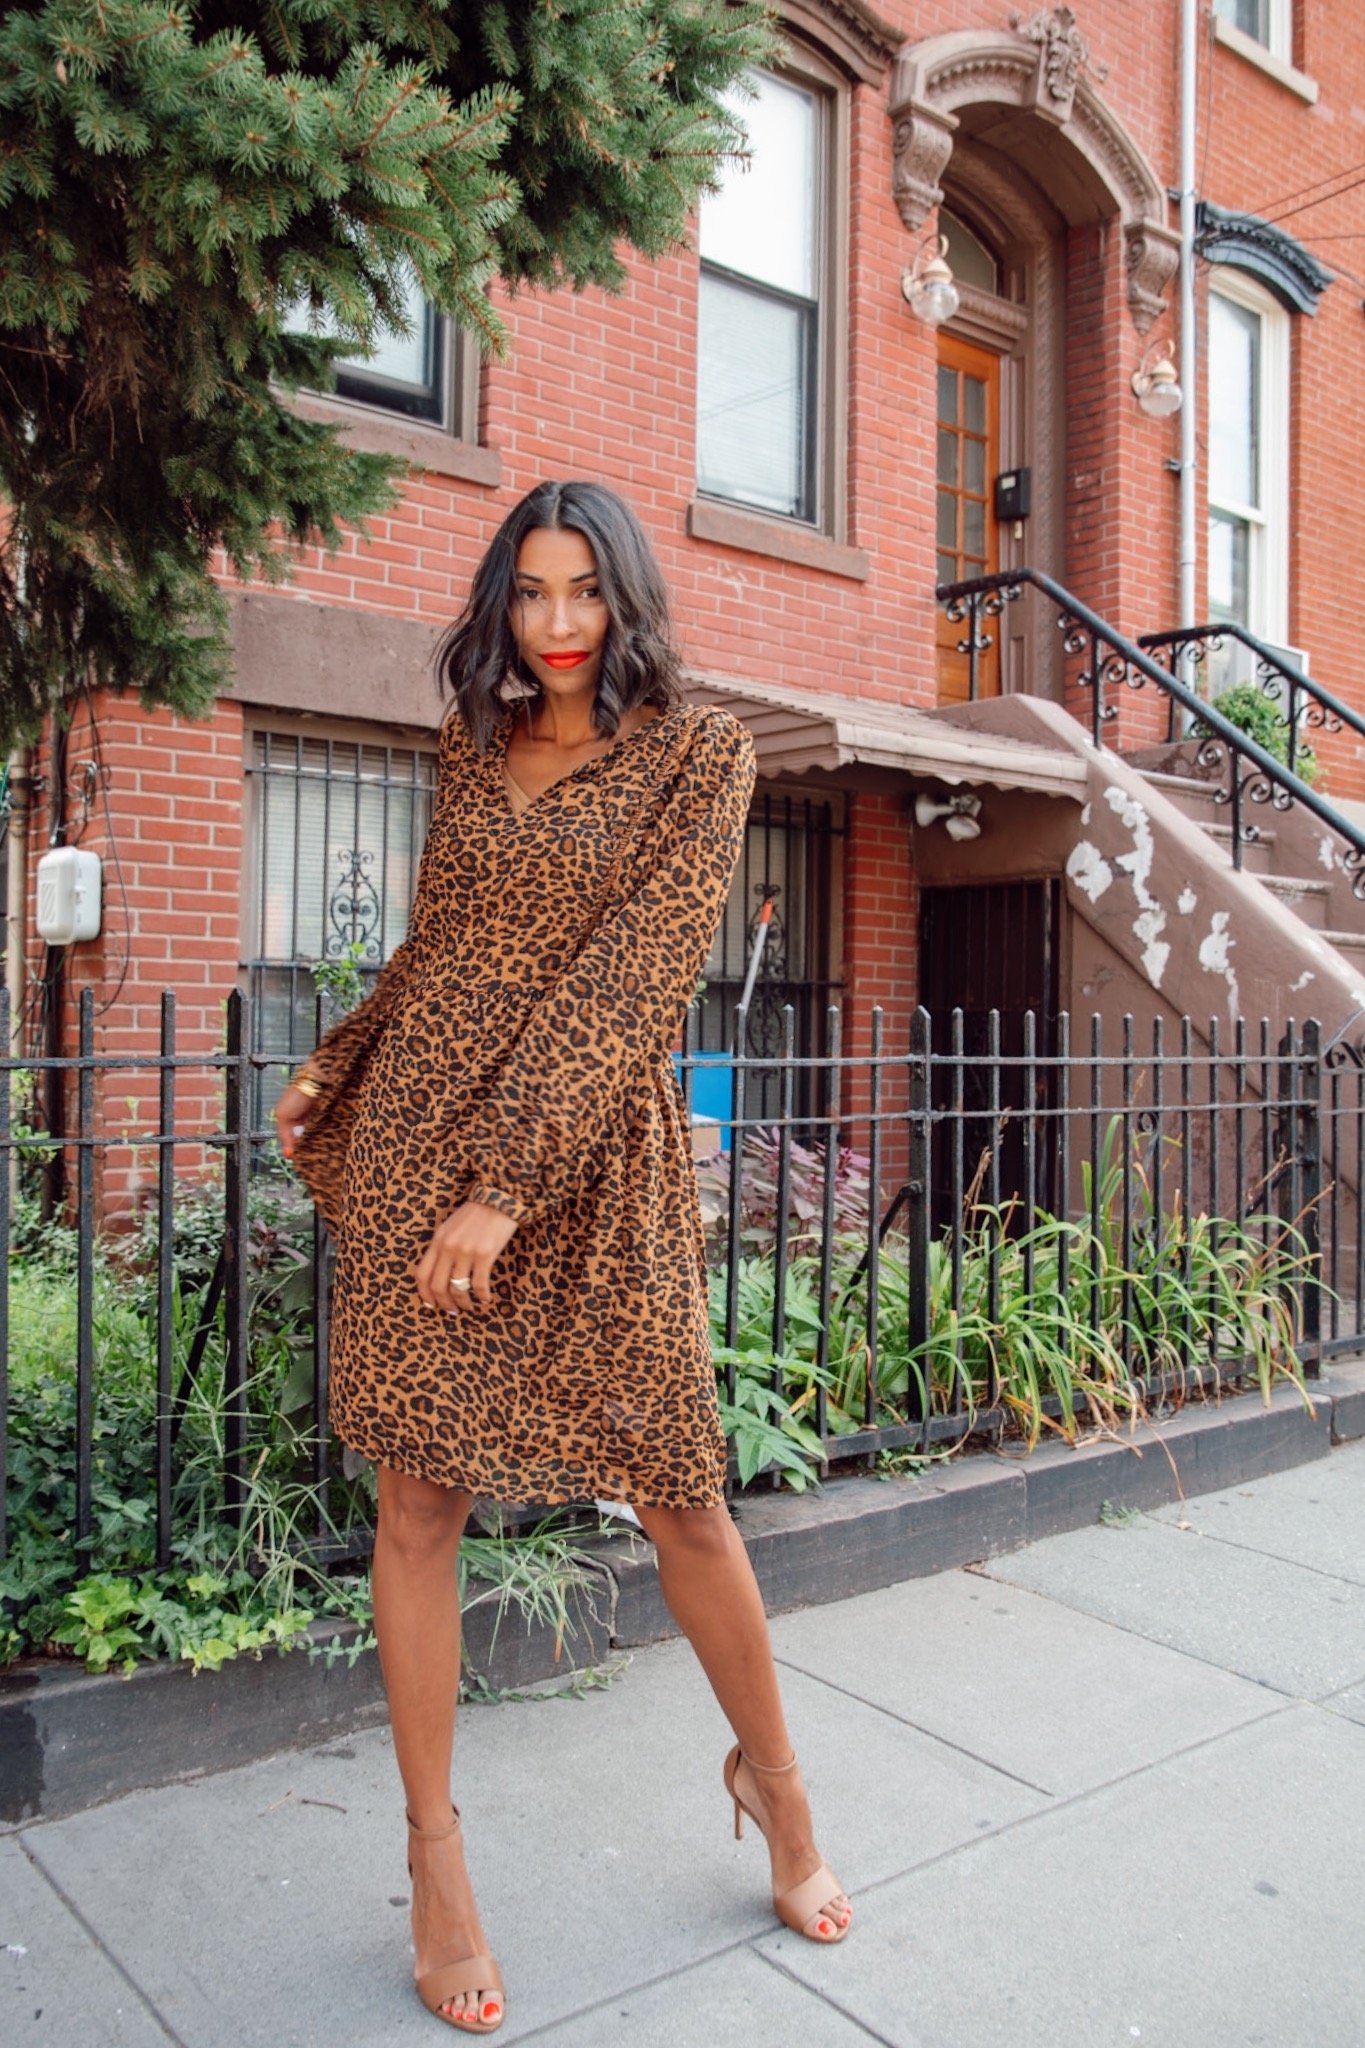 Chic Animal Print Pieces For The Fall All Under 30 Bucks Now! | Love ...